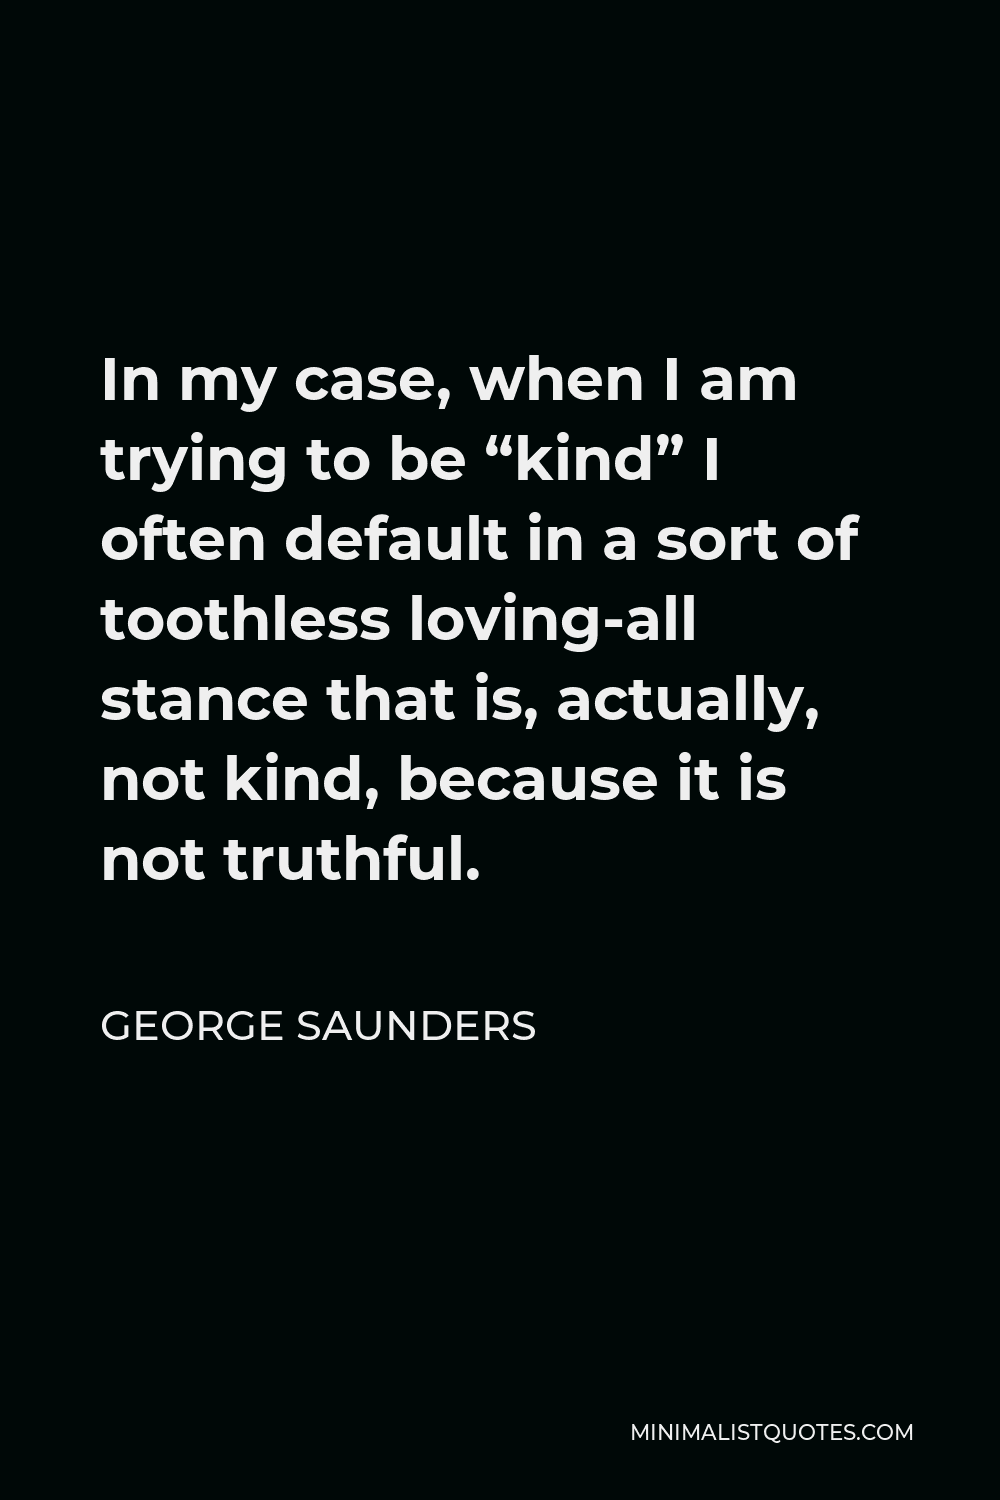 George Saunders Quote - In my case, when I am trying to be “kind” I often default in a sort of toothless loving-all stance that is, actually, not kind, because it is not truthful.